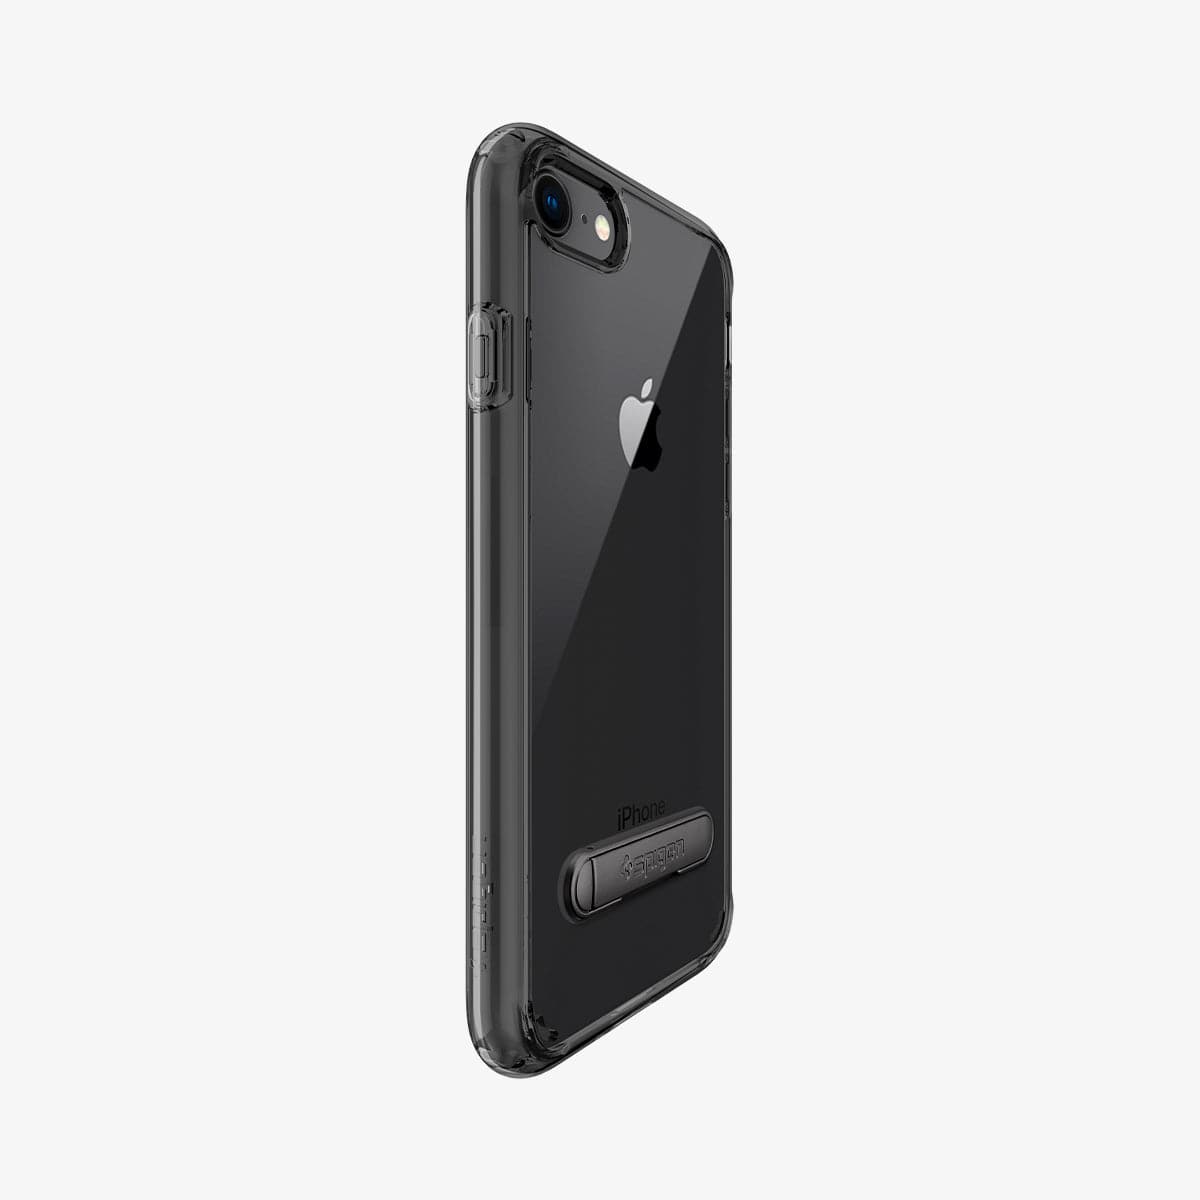 054CS22212 - iPhone 8 Series Ultra Hybrid S Case in Jet Black showing the side ang back